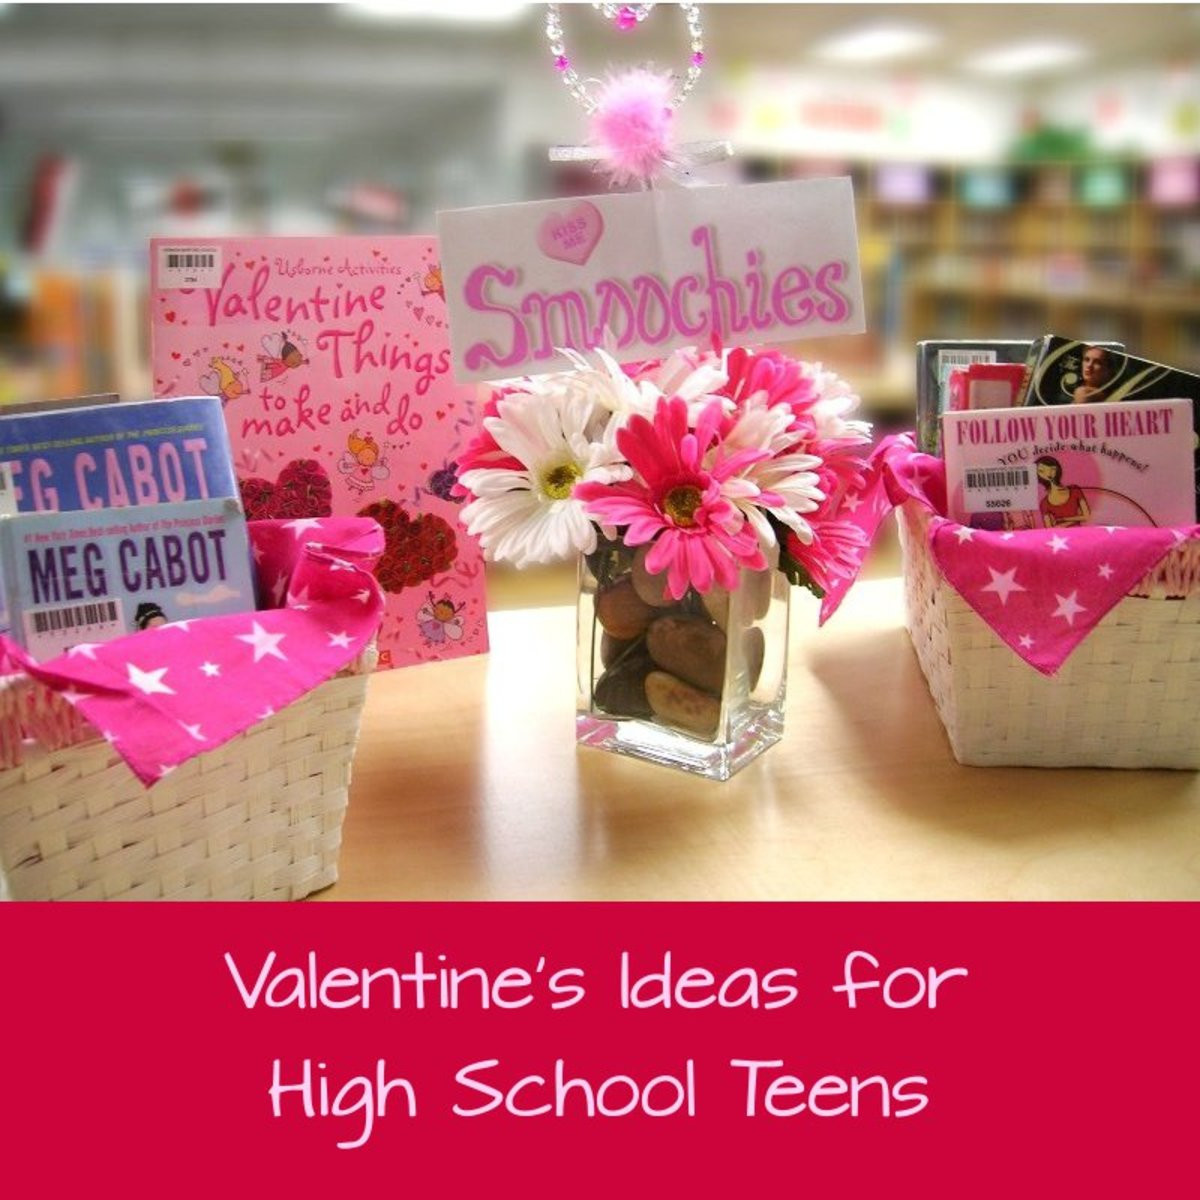 Valentines Day Ideas For Teenage Couples
 Valentine s Day Gift Ideas for High School Teens